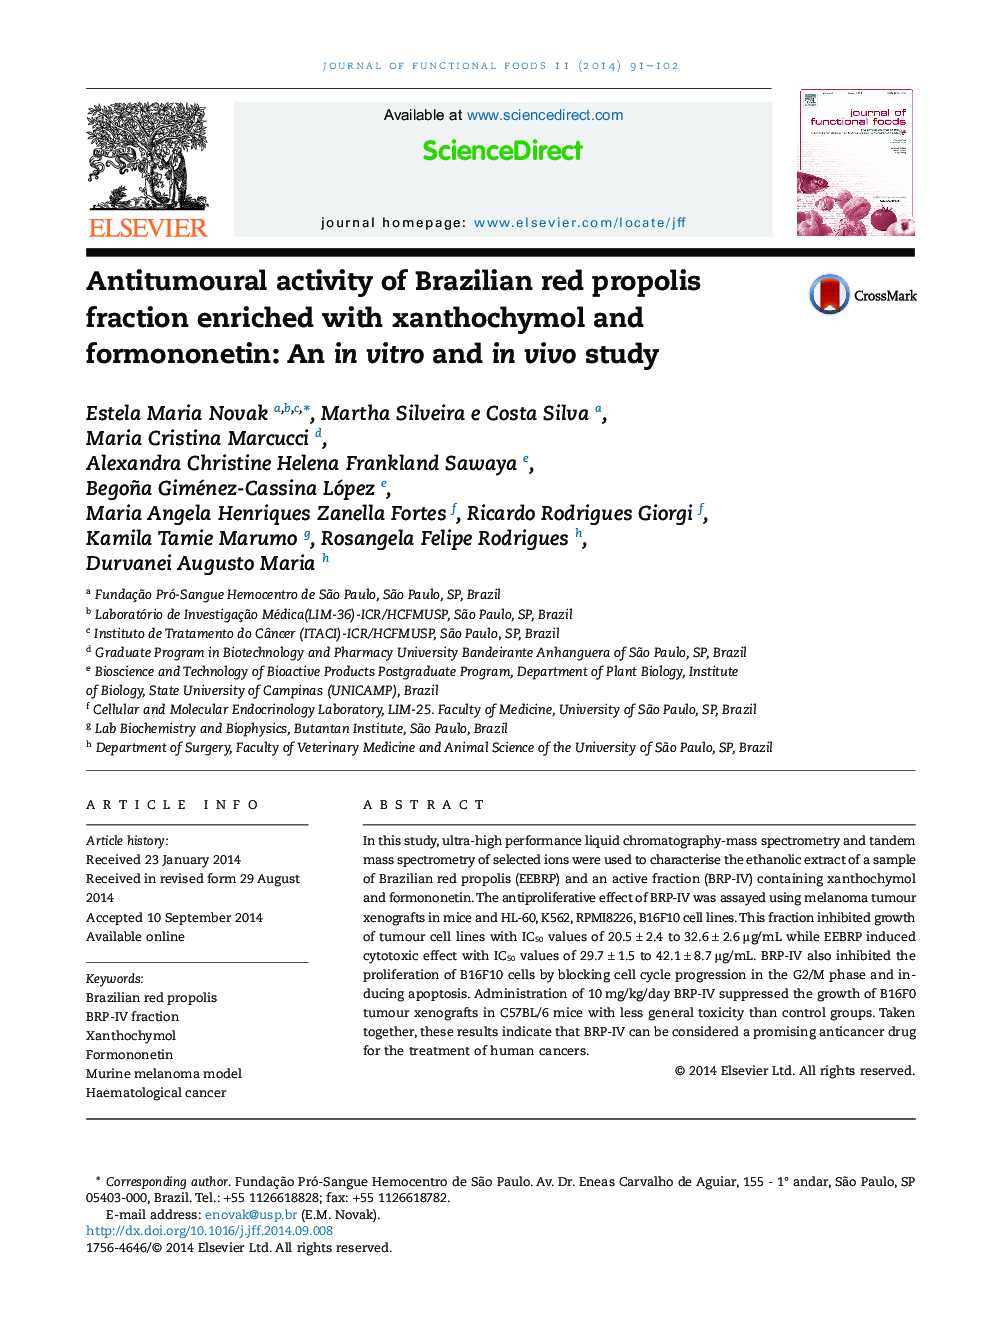 Antitumoural activity of Brazilian red propolis fraction enriched with xanthochymol and formononetin: An in vitro and in vivo study